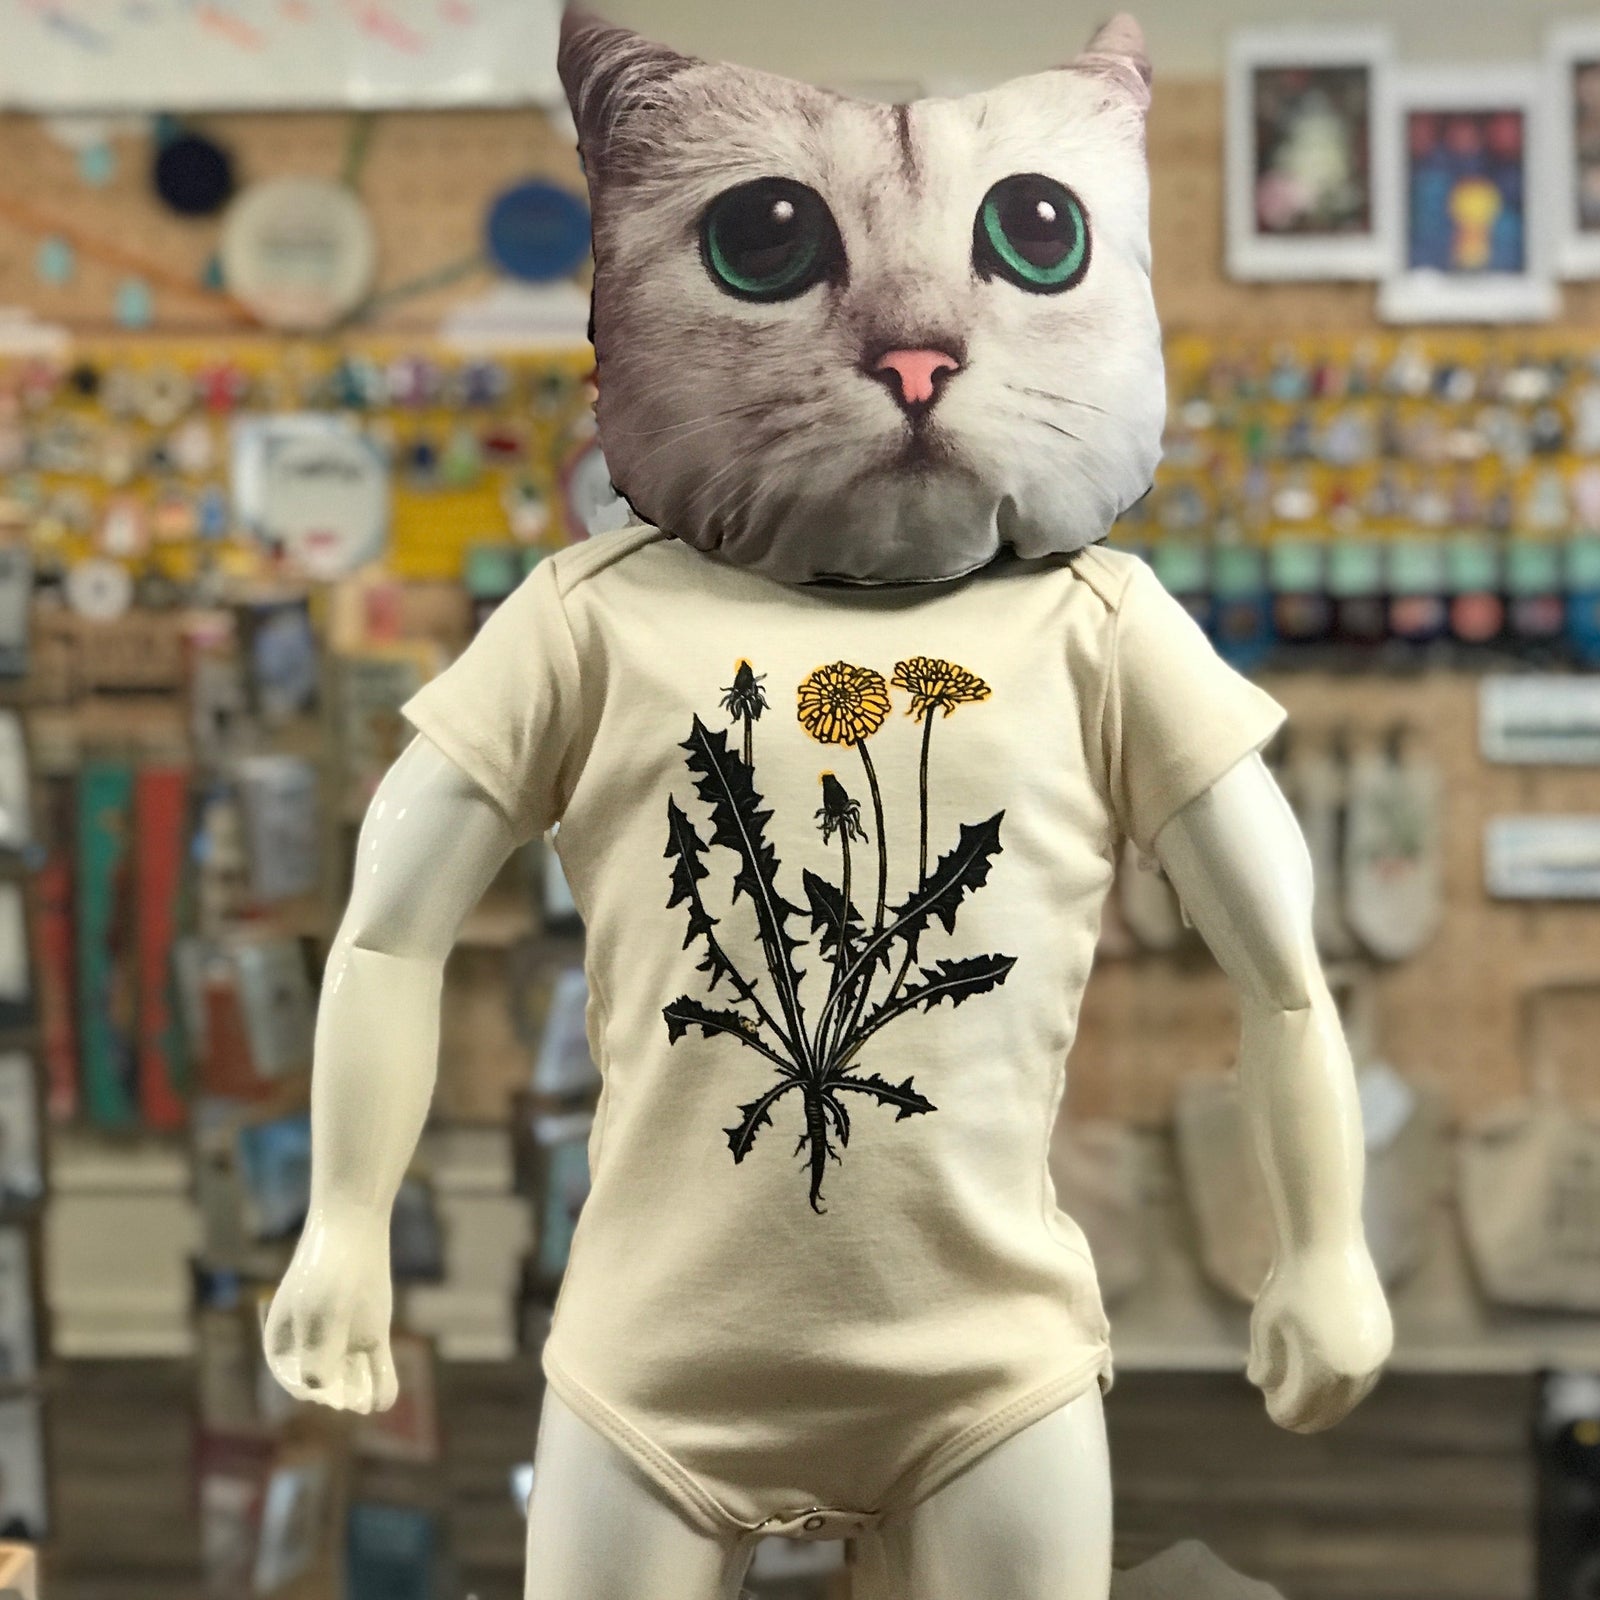 A baby mannequin with a cat head wearing a screenprinted onesie with a dandelion on it. The background shows a blurry store in the background.